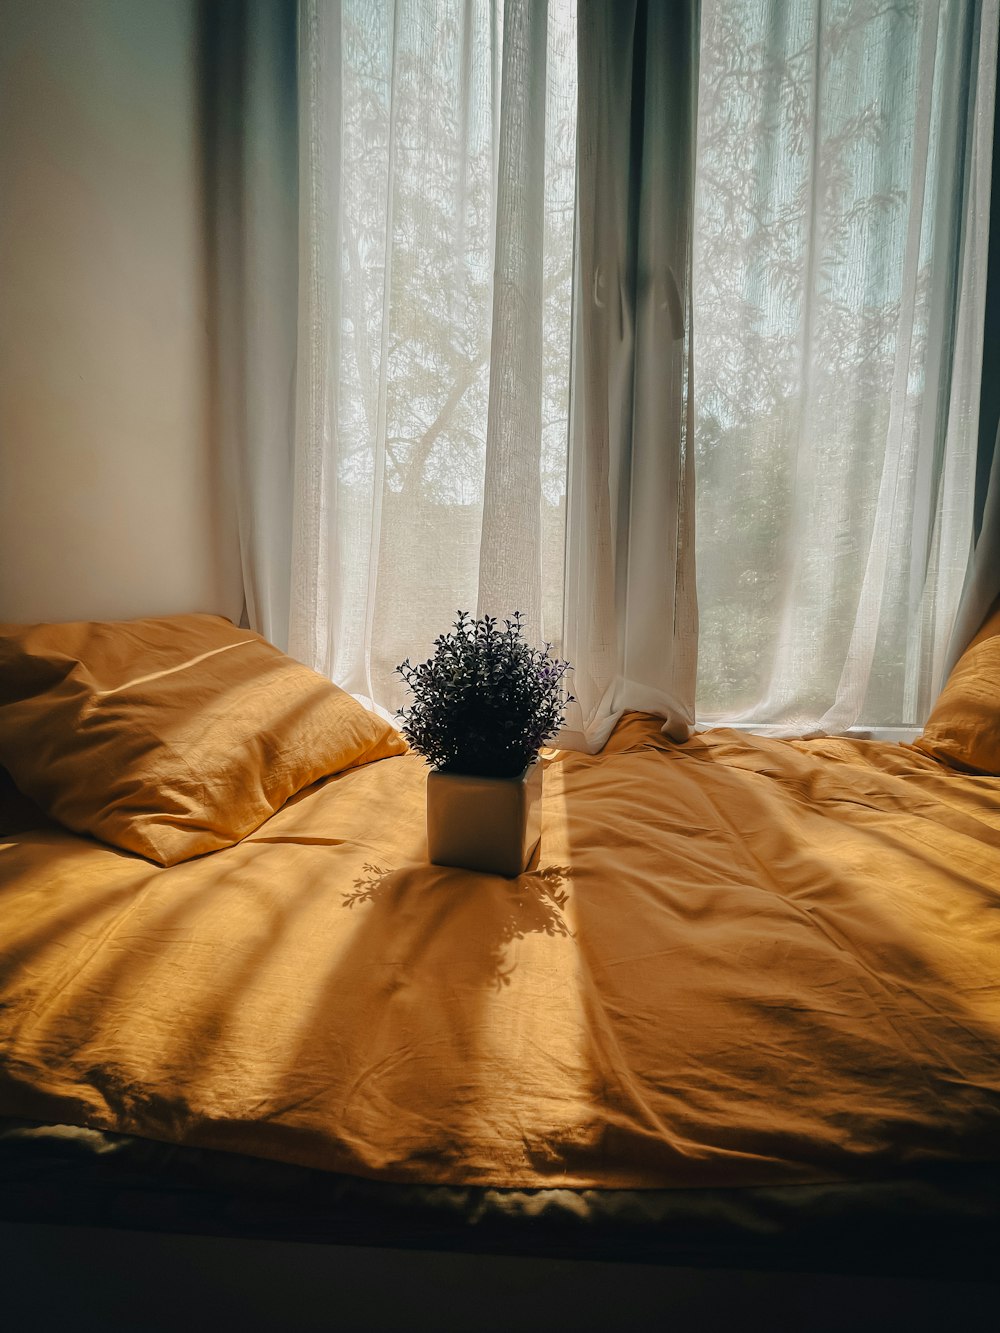 a plant in a pot on a bed